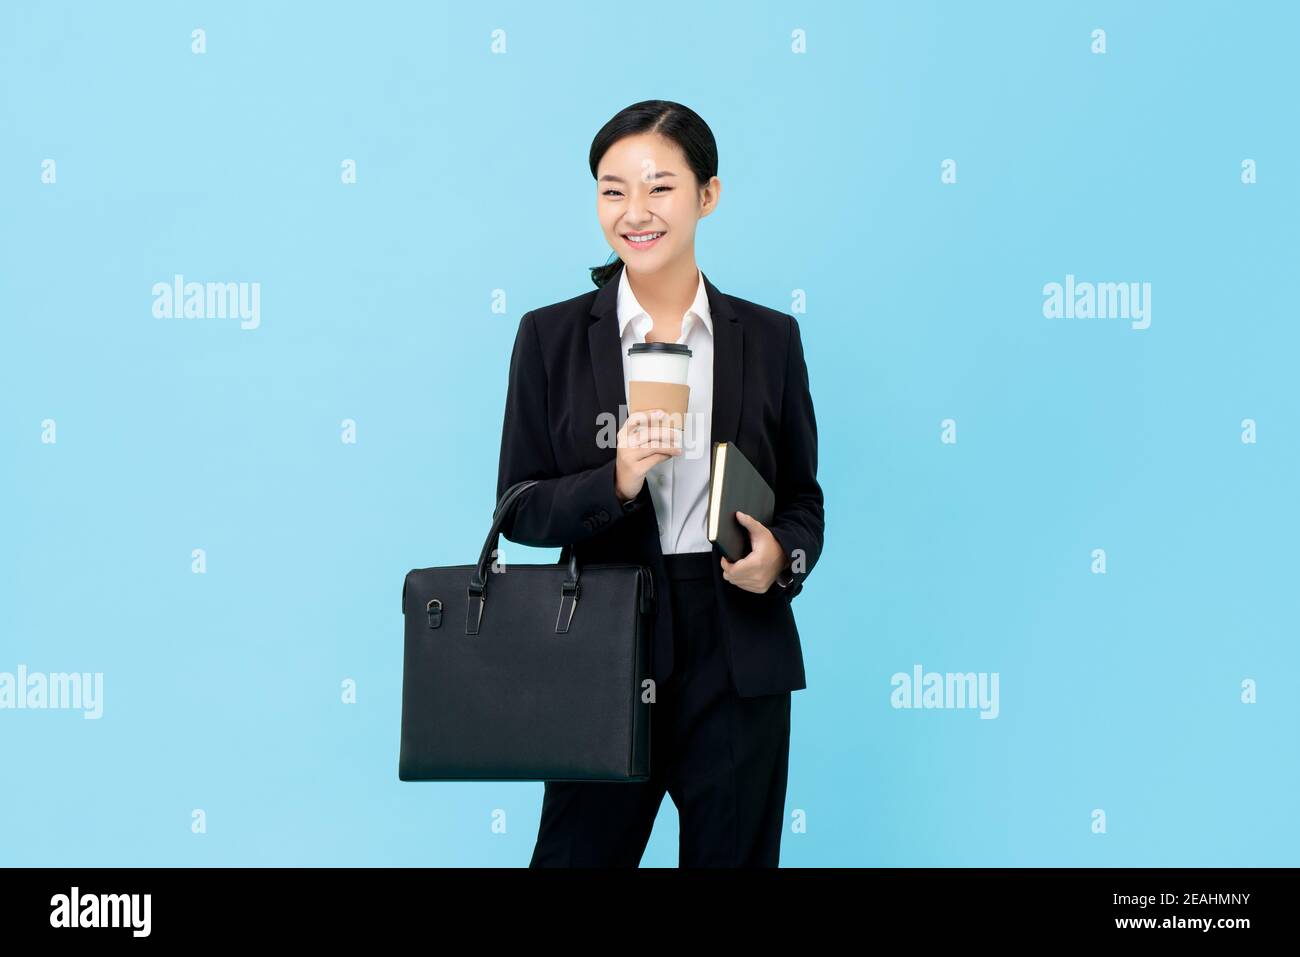 Professional Asian businesswoman in formal suit holding briefcase coffee cup and book isolated on light blue background Stock Photo